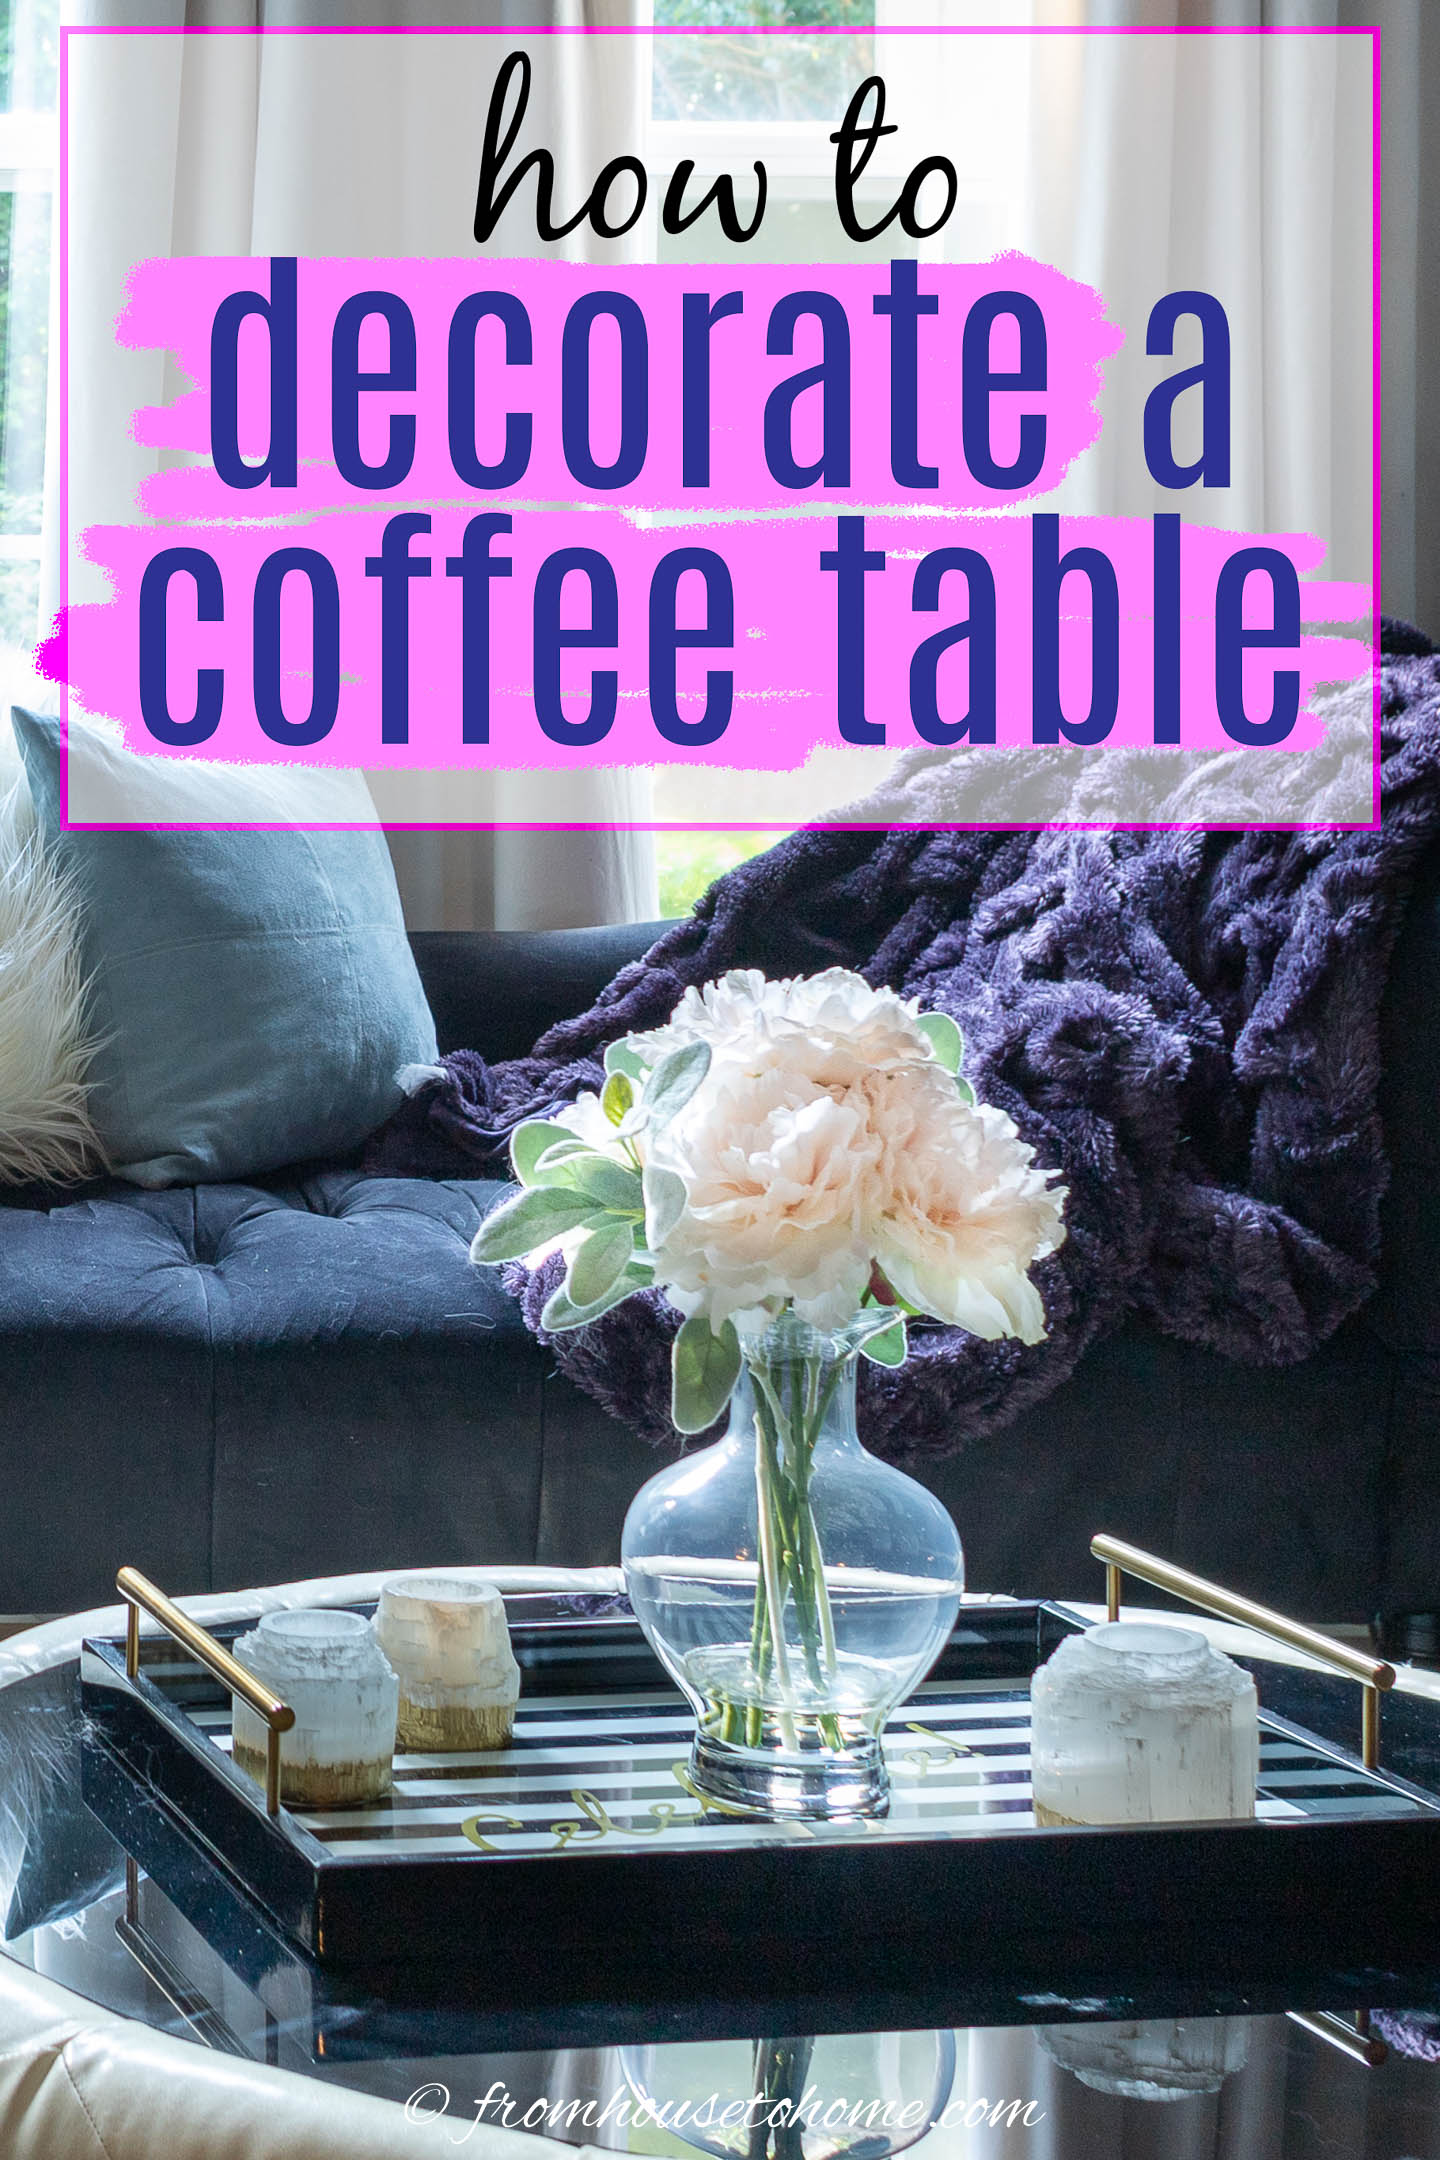 How to decorate a coffee table